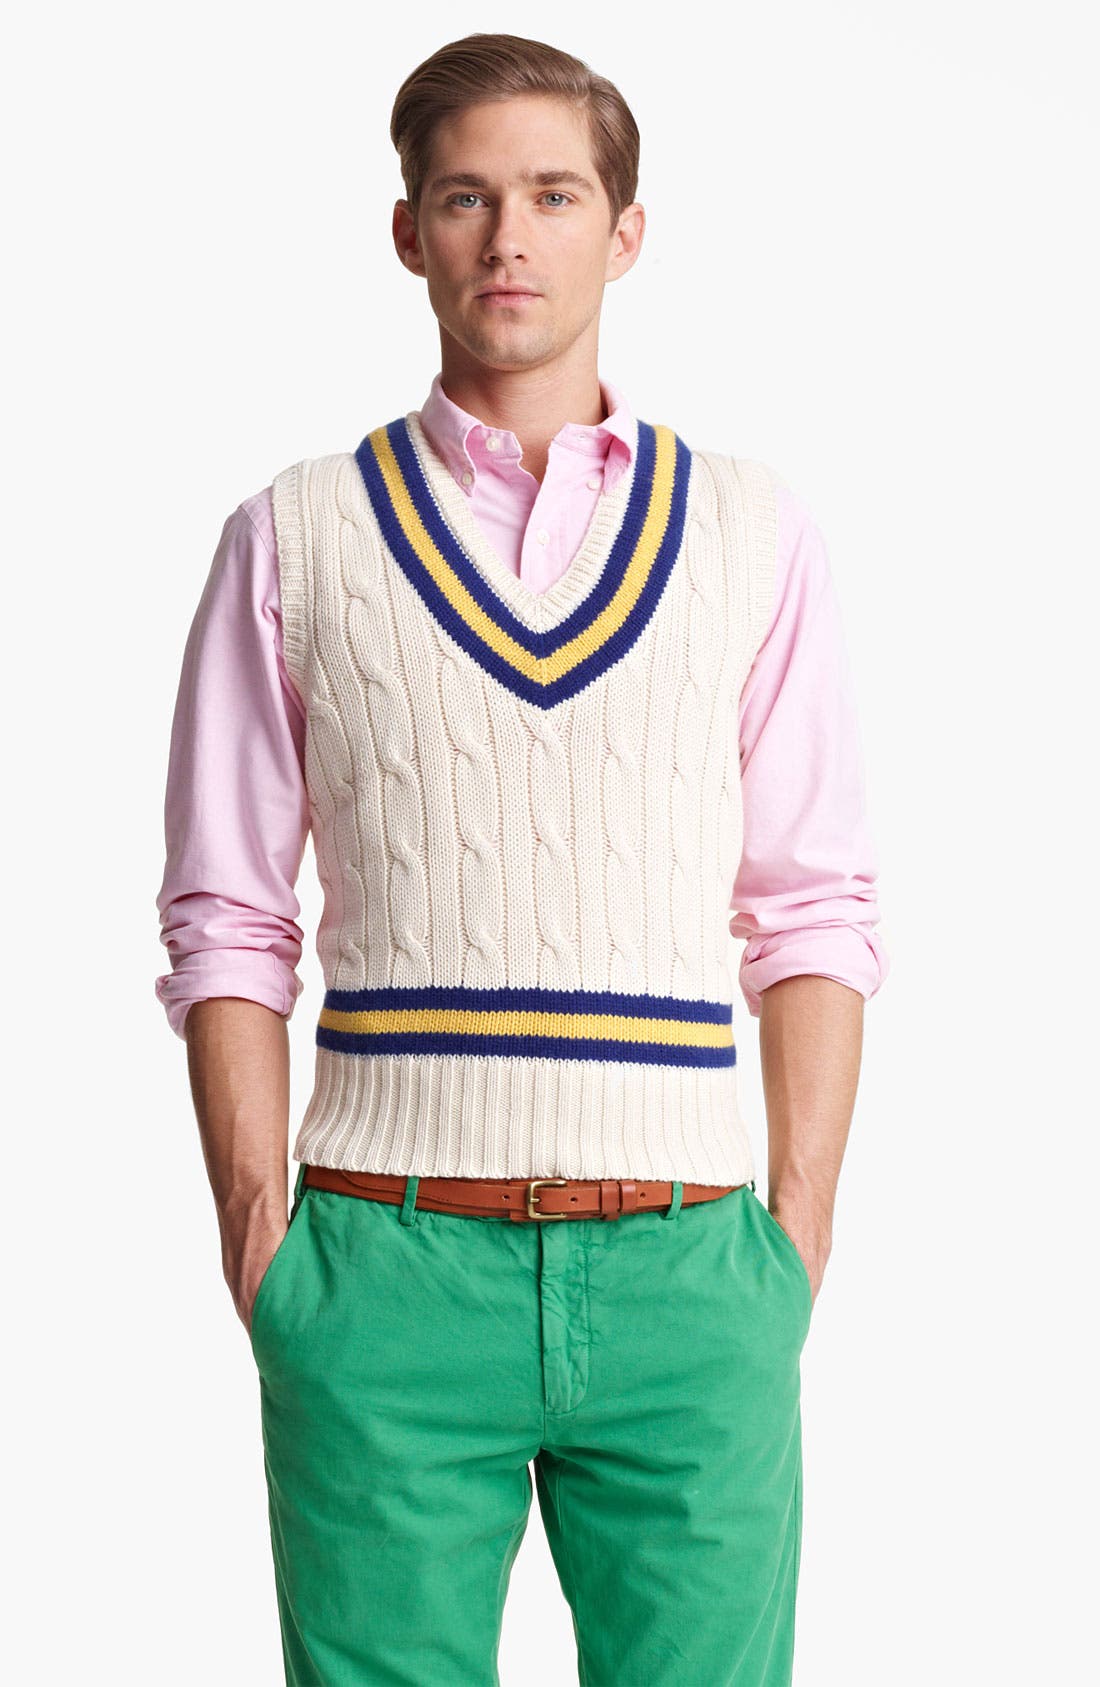 polo and sweater vest